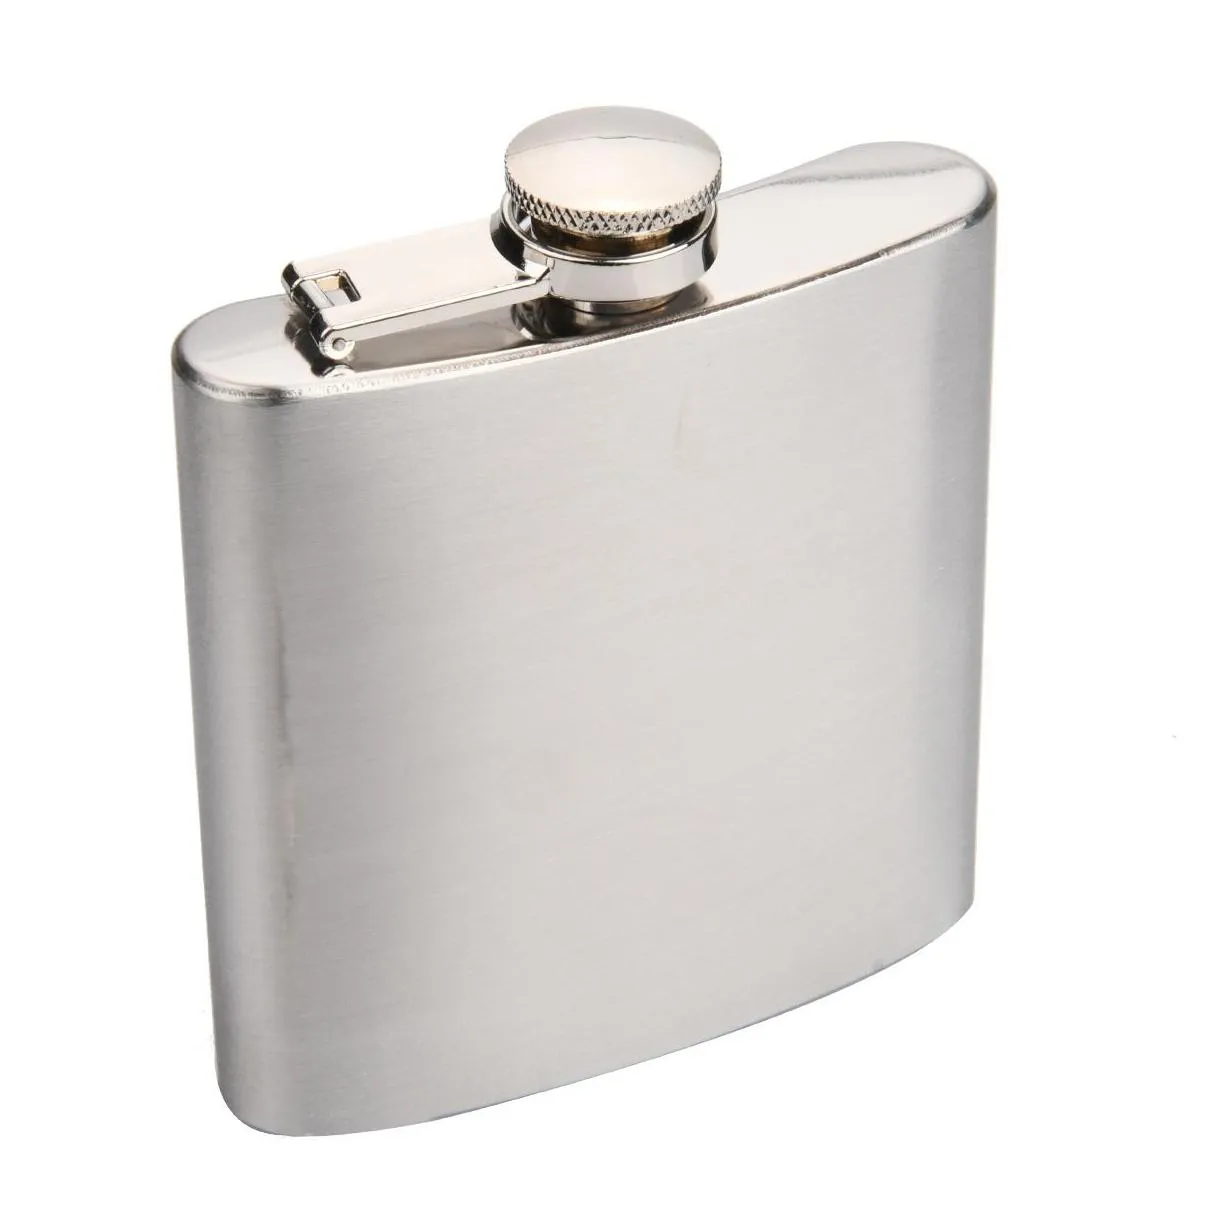 6oz Stainless Steel Hip Flask camping Portable Outdoor Flagon Whisky Stoup Wine Pot Alcohol Bottles Hip Flasks drop ship